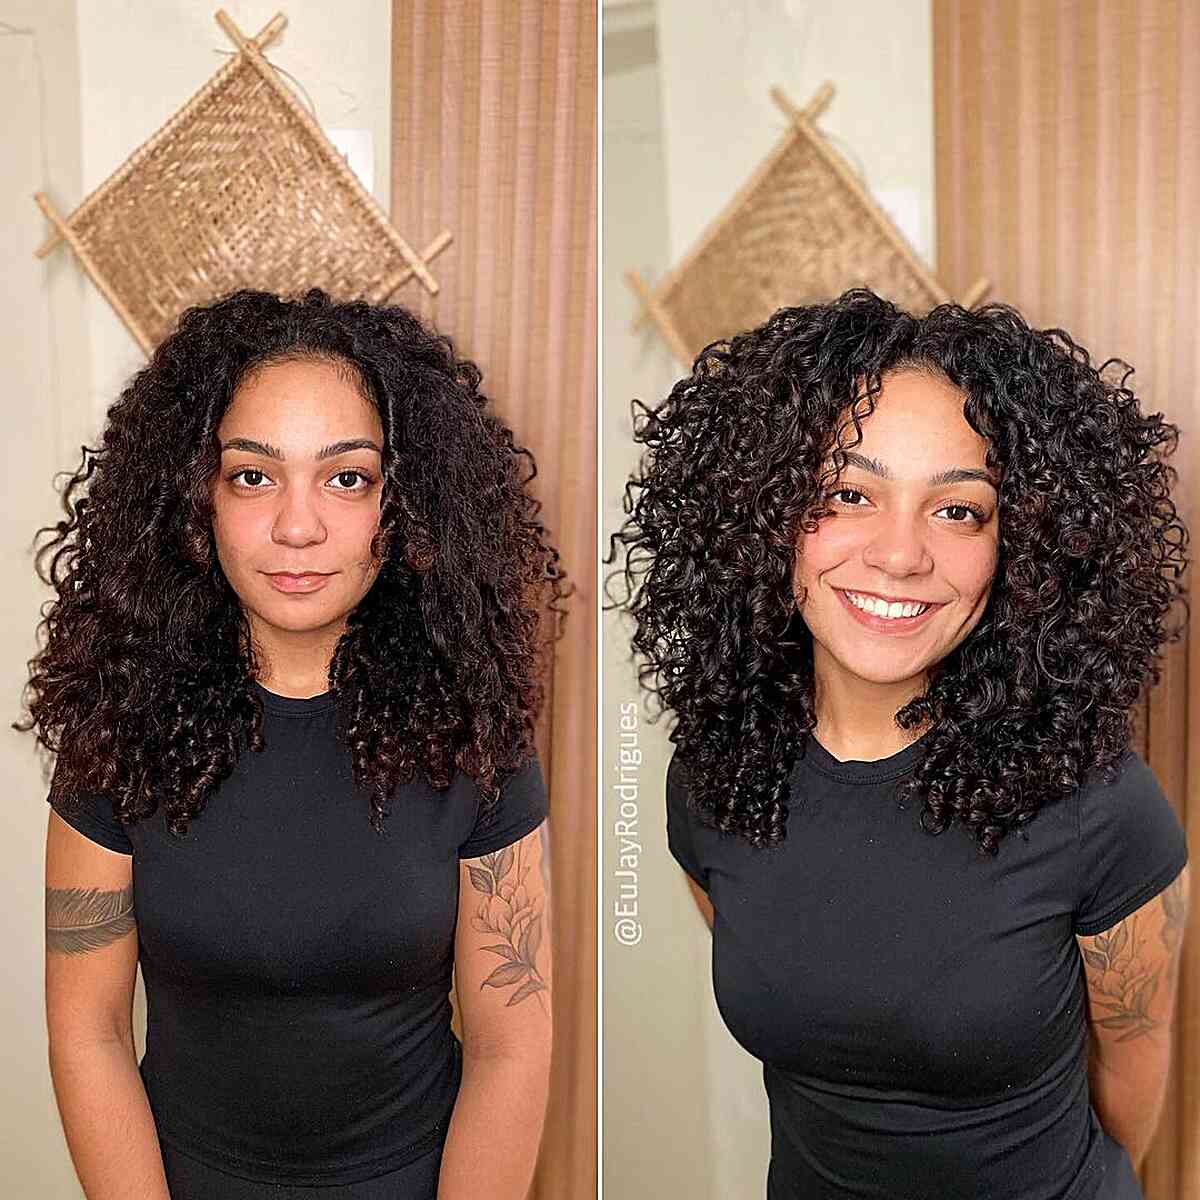 Before and after images of a woman with a center-parted Cadō cut, showcasing the transformation and enhancement of her layered curly hair.